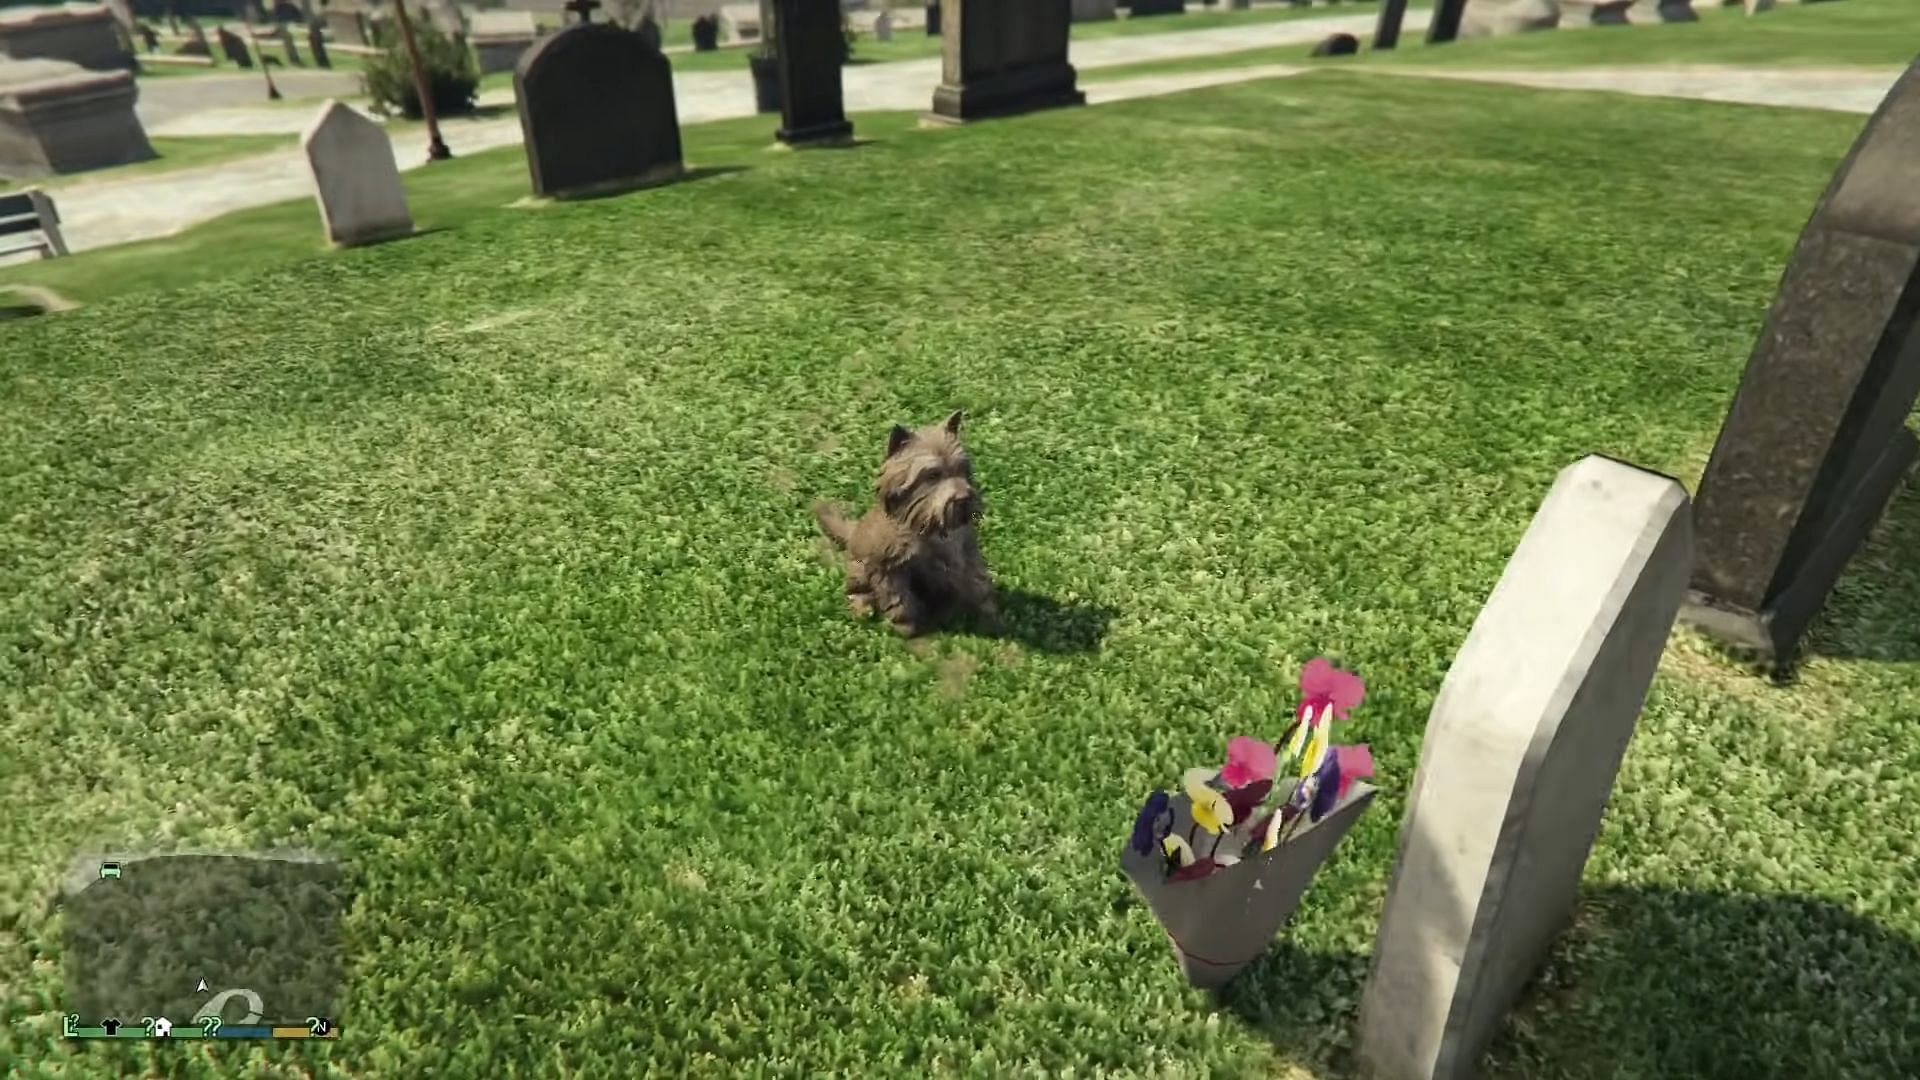 The dog can be found sitting near this tombstone (Image via Rockstar Games || Gnarly Carly, YouTube)